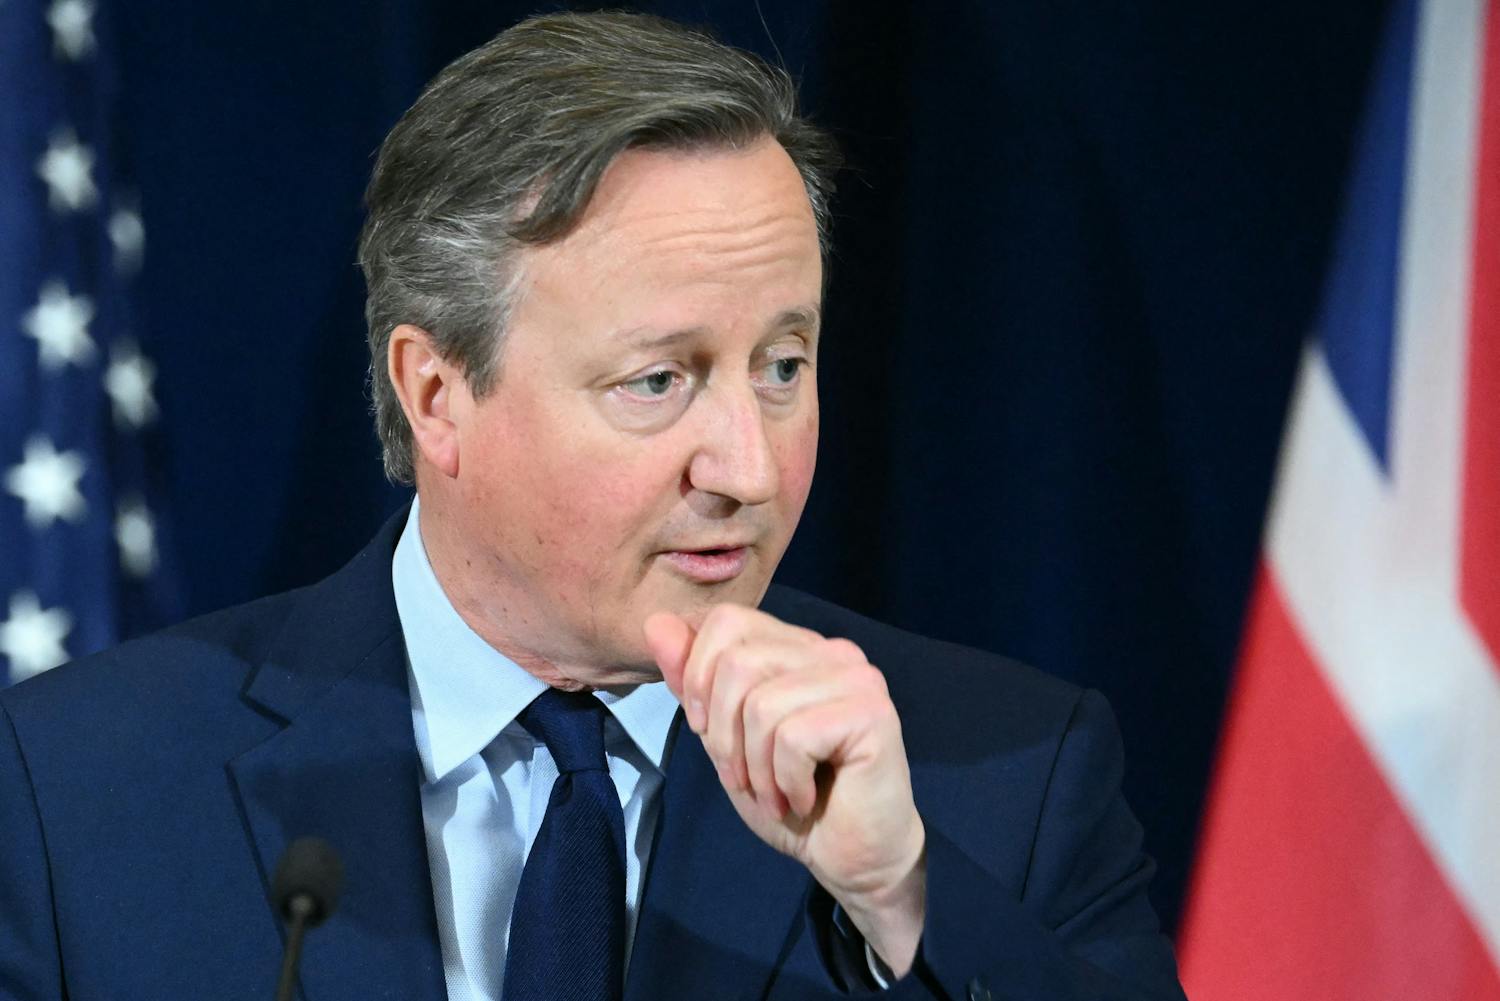 Cameron's visit to the United States ends in deception